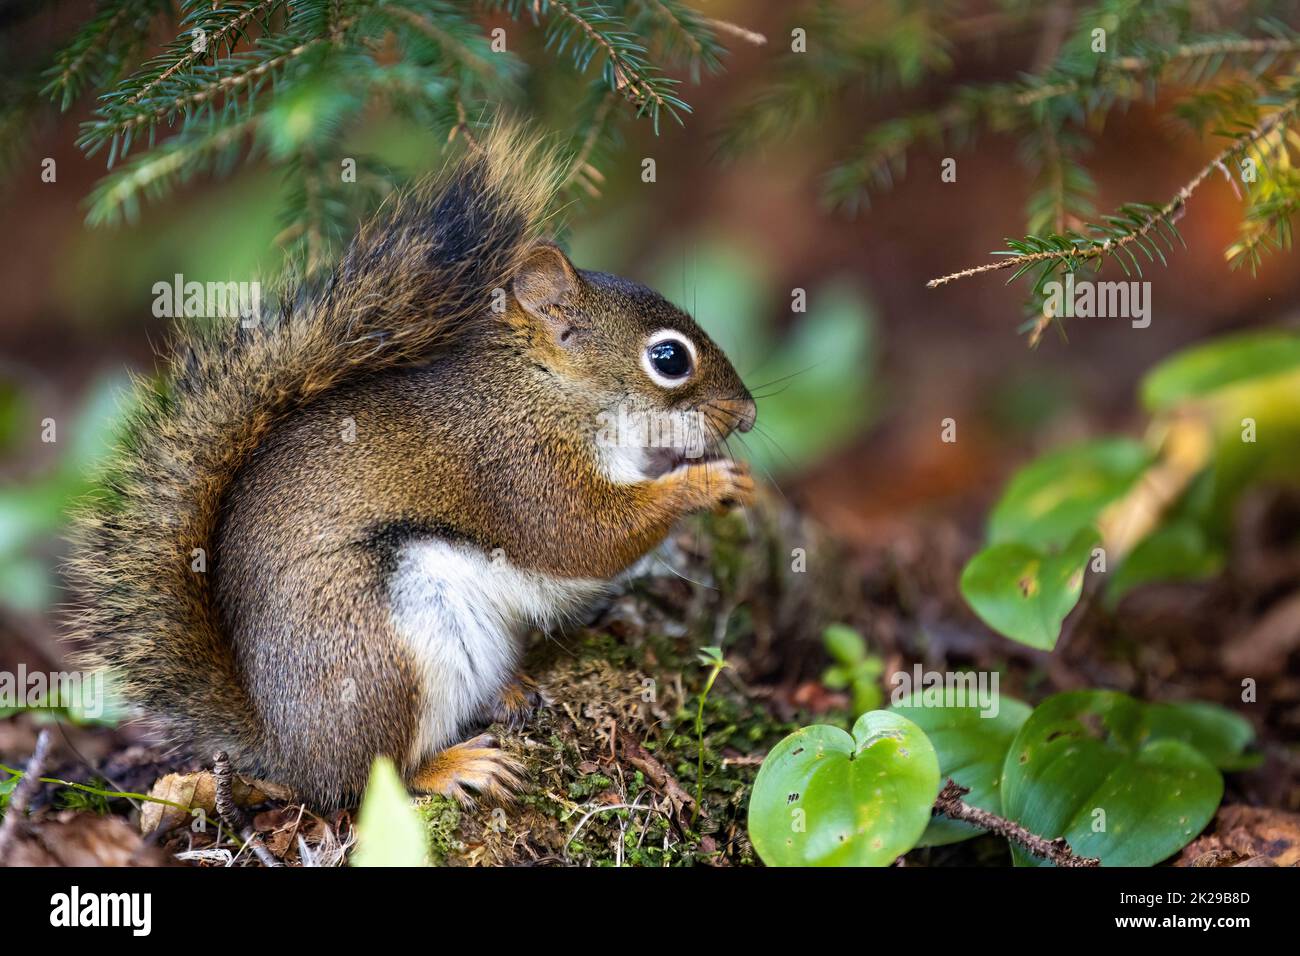 Cute fluffy looking close up squirrel portrait in the forest Stock Photo